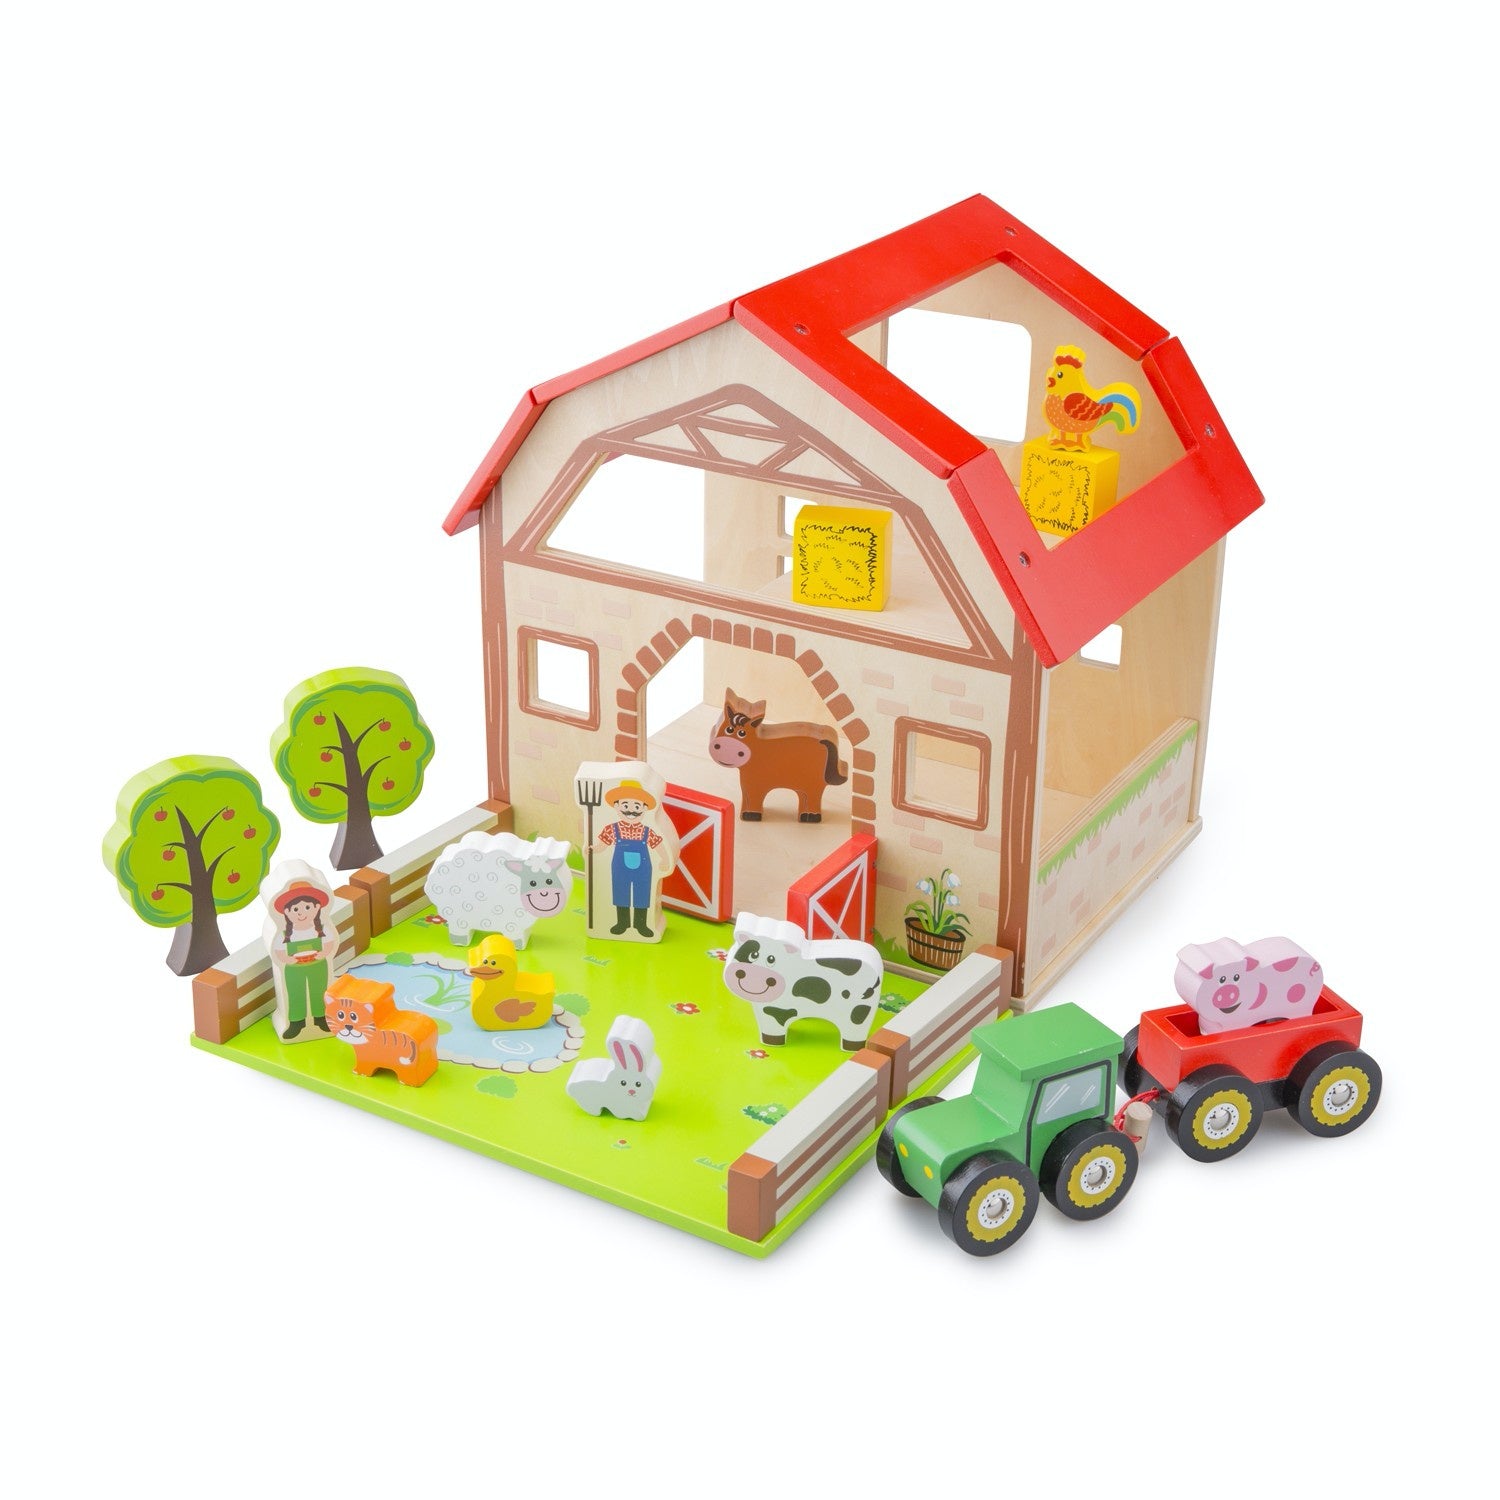 New Classic Wooden Toy Farm Play Set